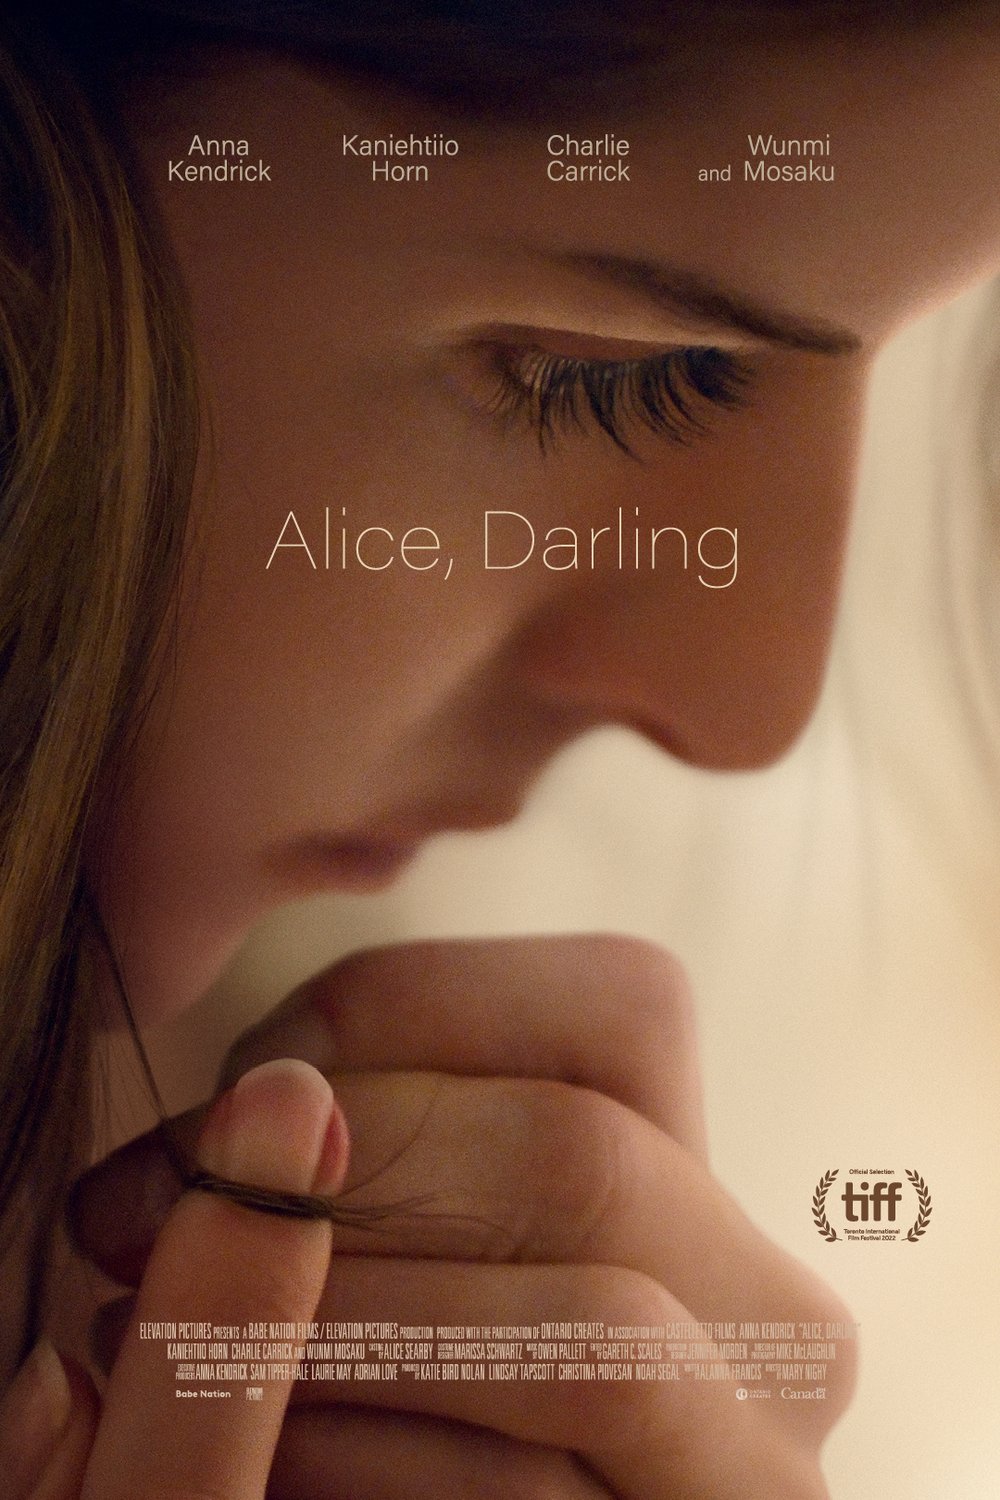 Poster of the movie Alice, Darling